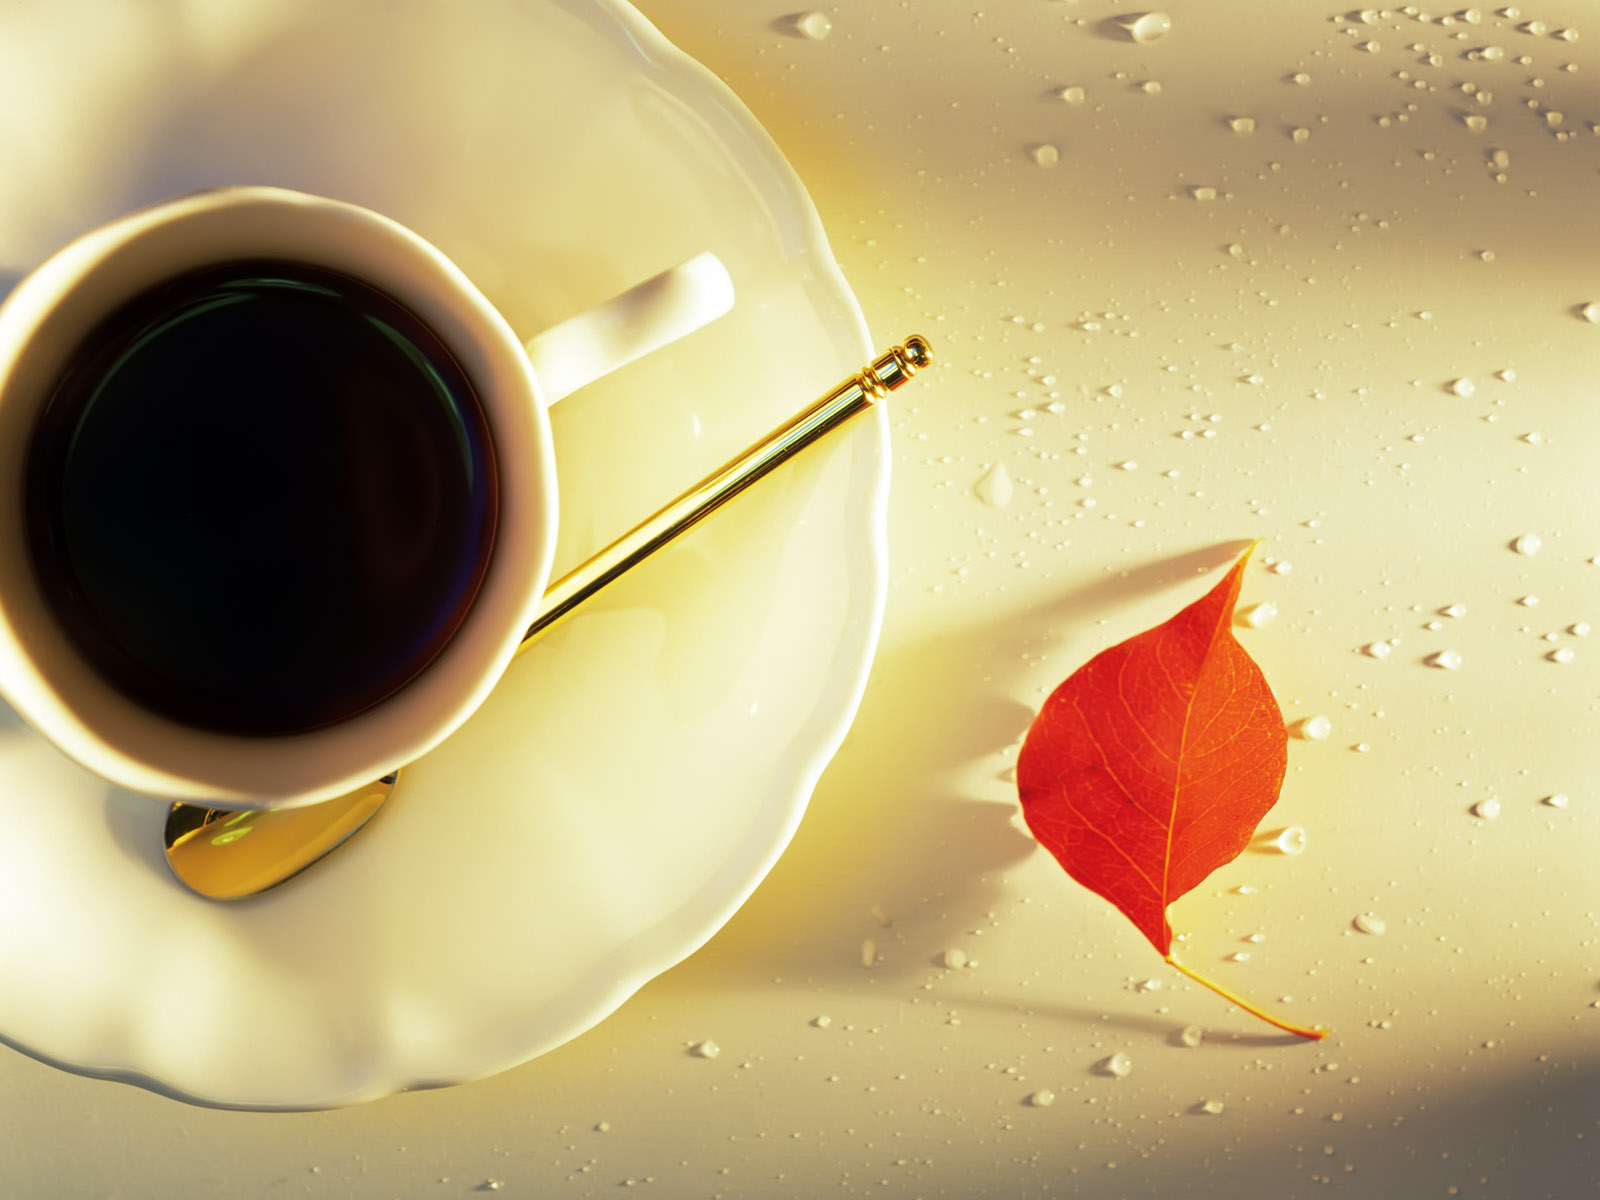 Coffe Break Wallpapers And Stock Photos - Have A Energetic Day , HD Wallpaper & Backgrounds